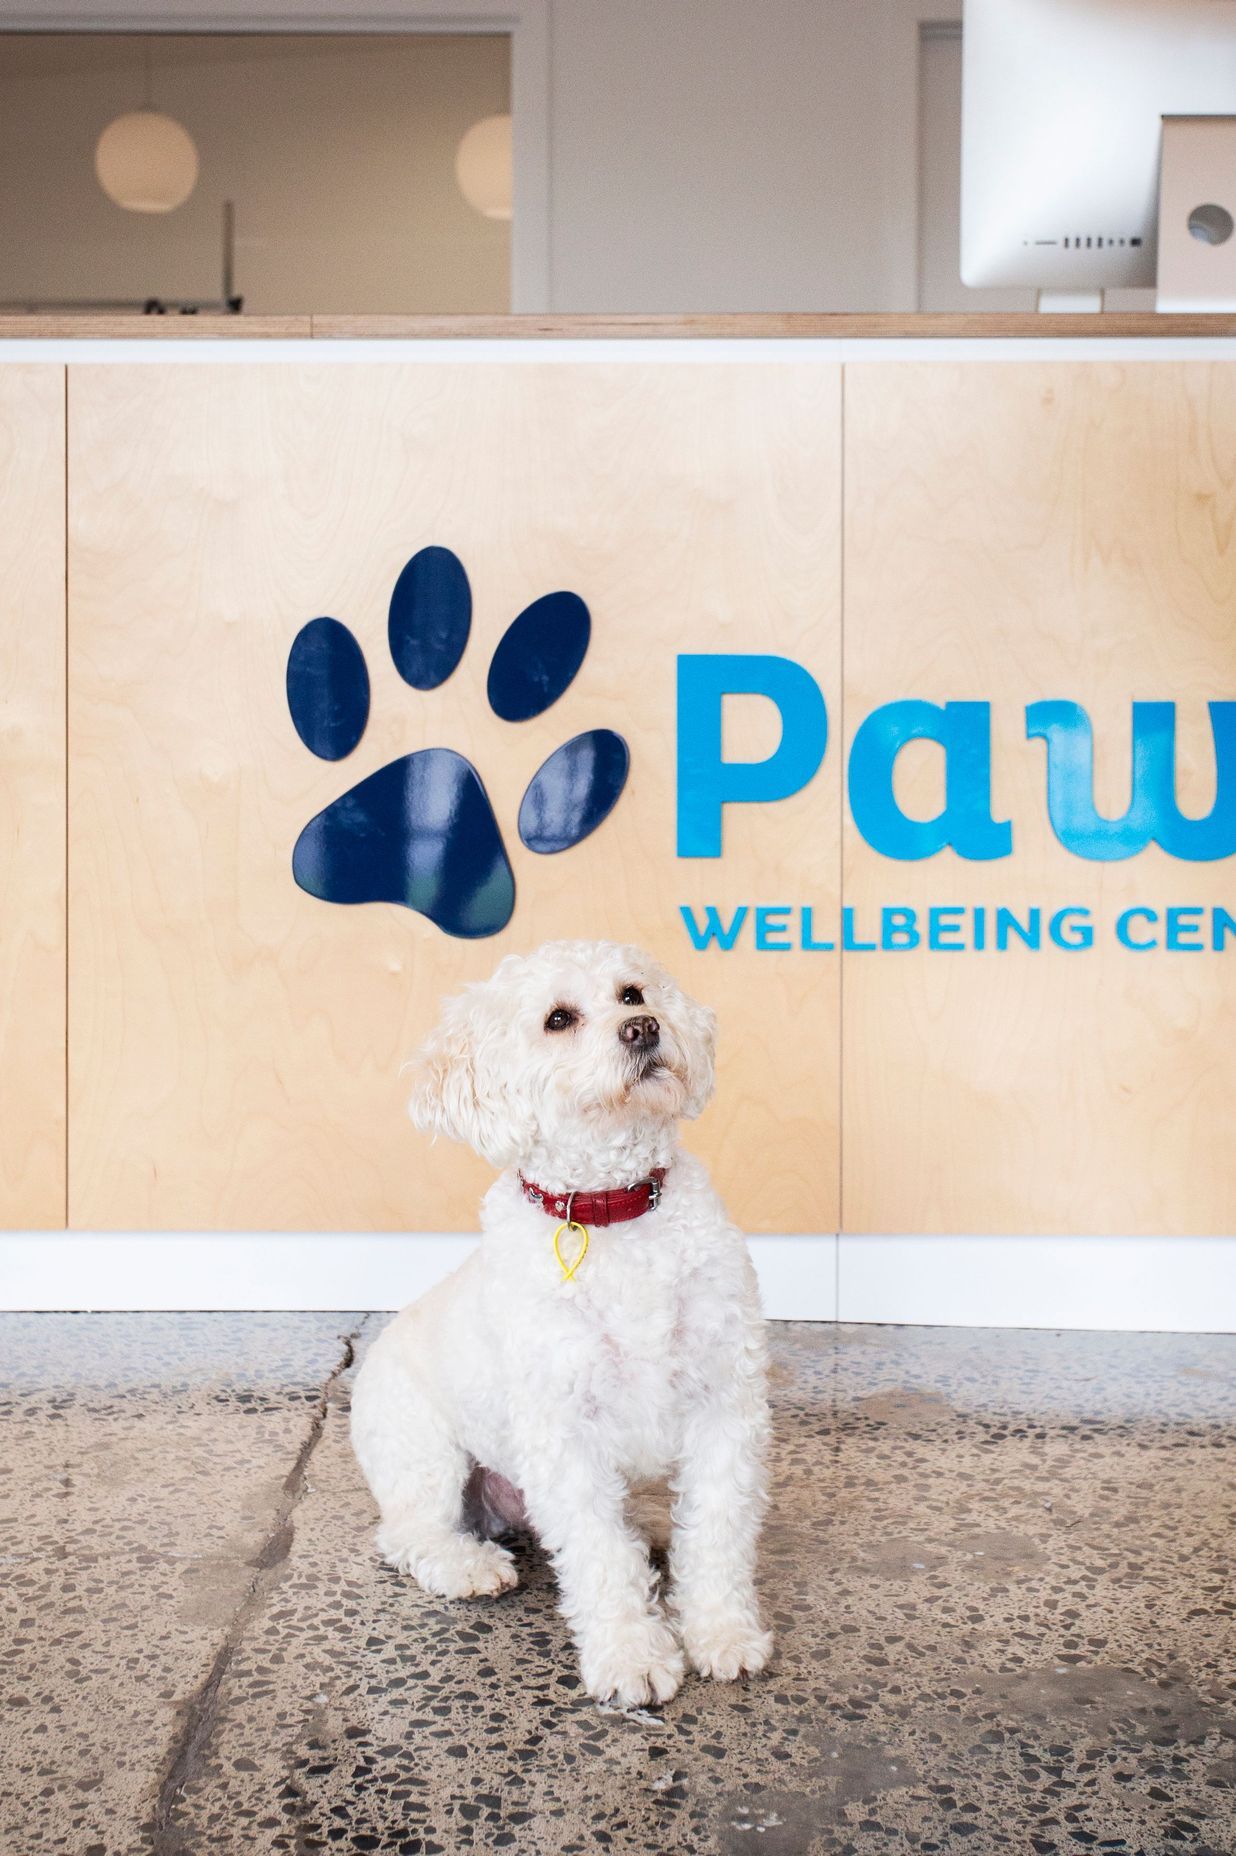 Paws Wellbeing Centre